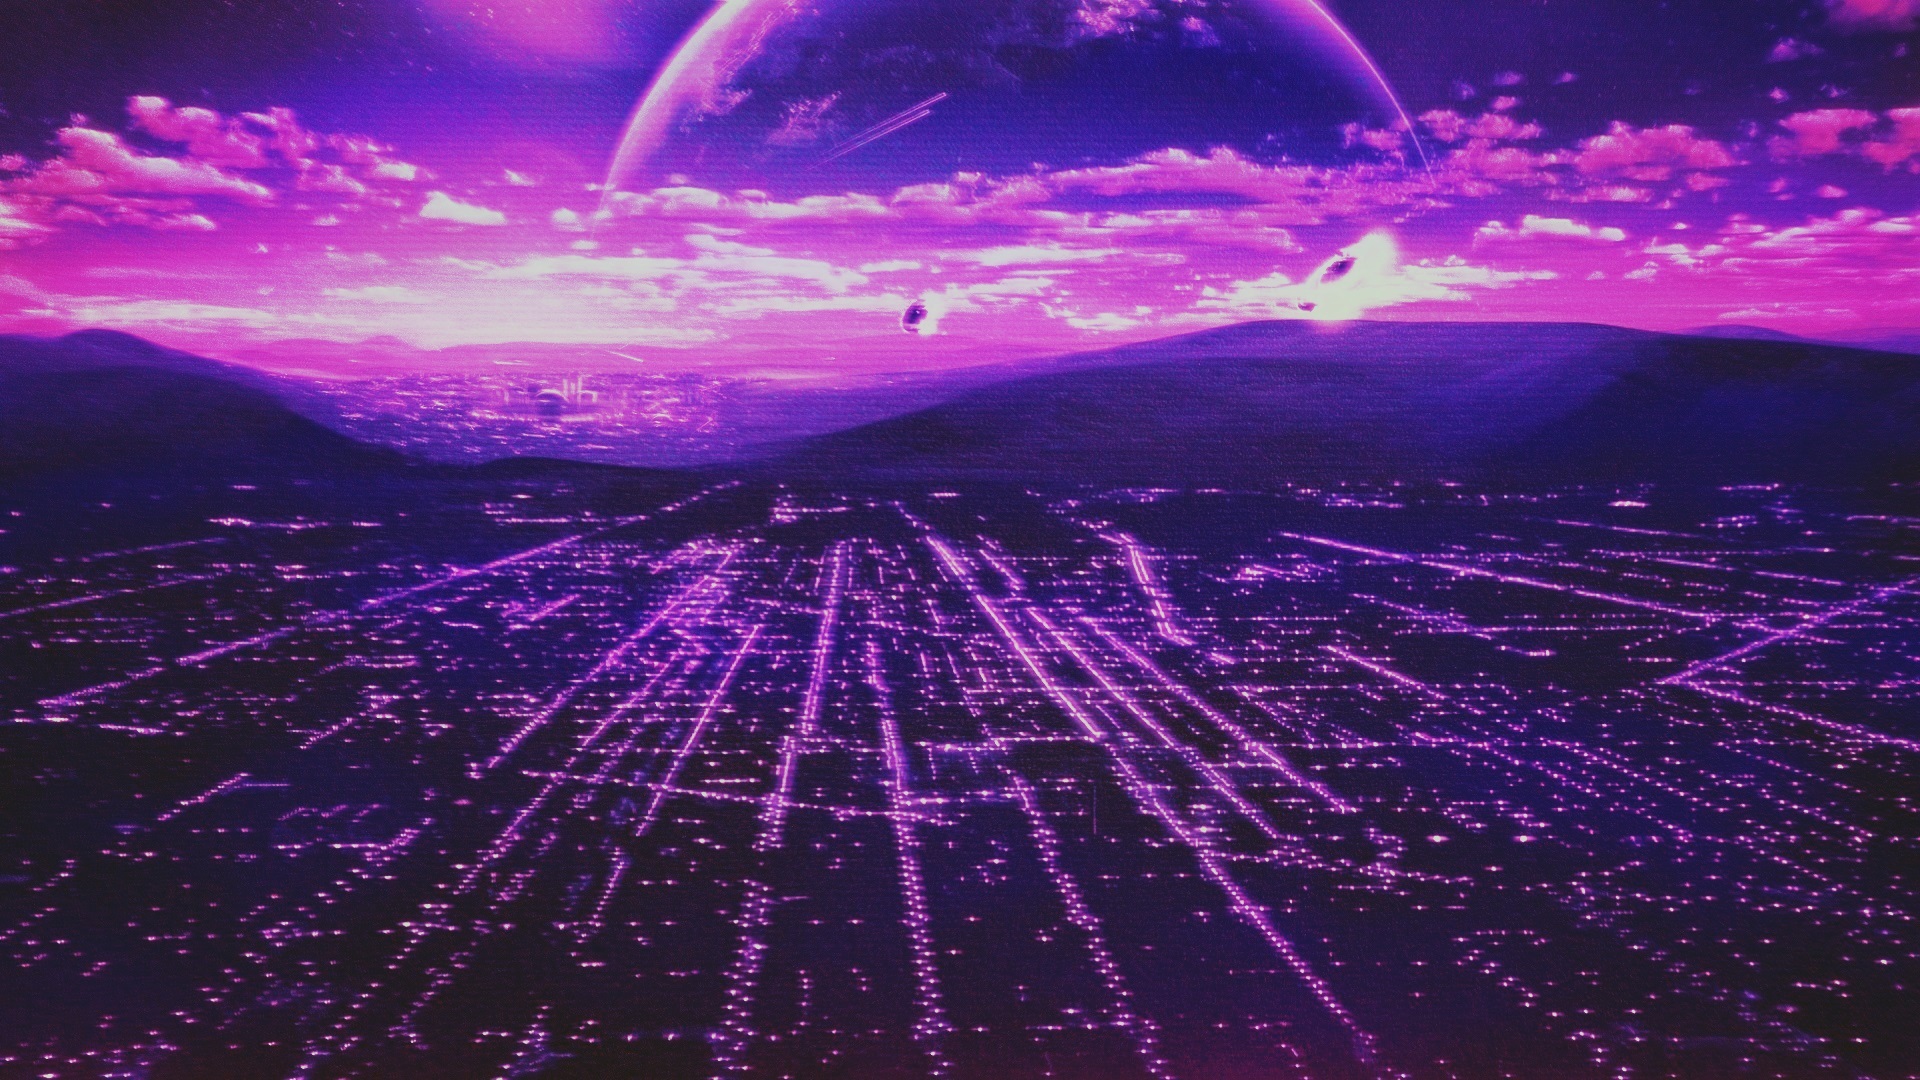 Retro style, Scanlines, City, Planet Wallpapers HD / Desktop and Mobile